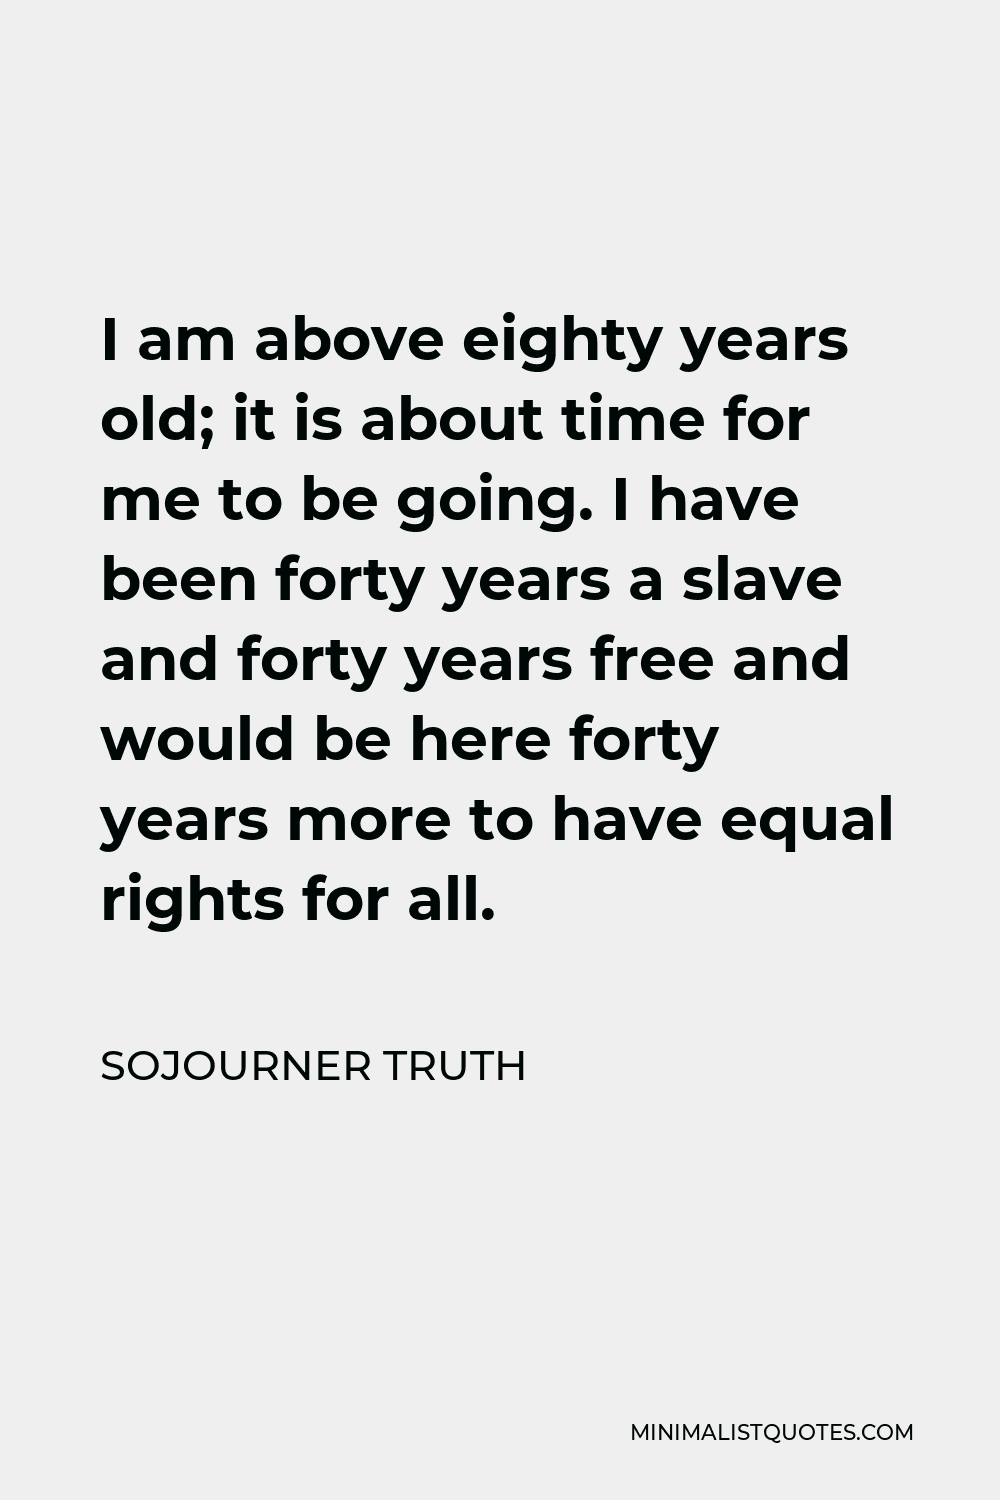 Sojourner Truth Quote - I am above eighty years old; it is about time for me to be going. I have been forty years a slave and forty years free and would be here forty years more to have equal rights for all.